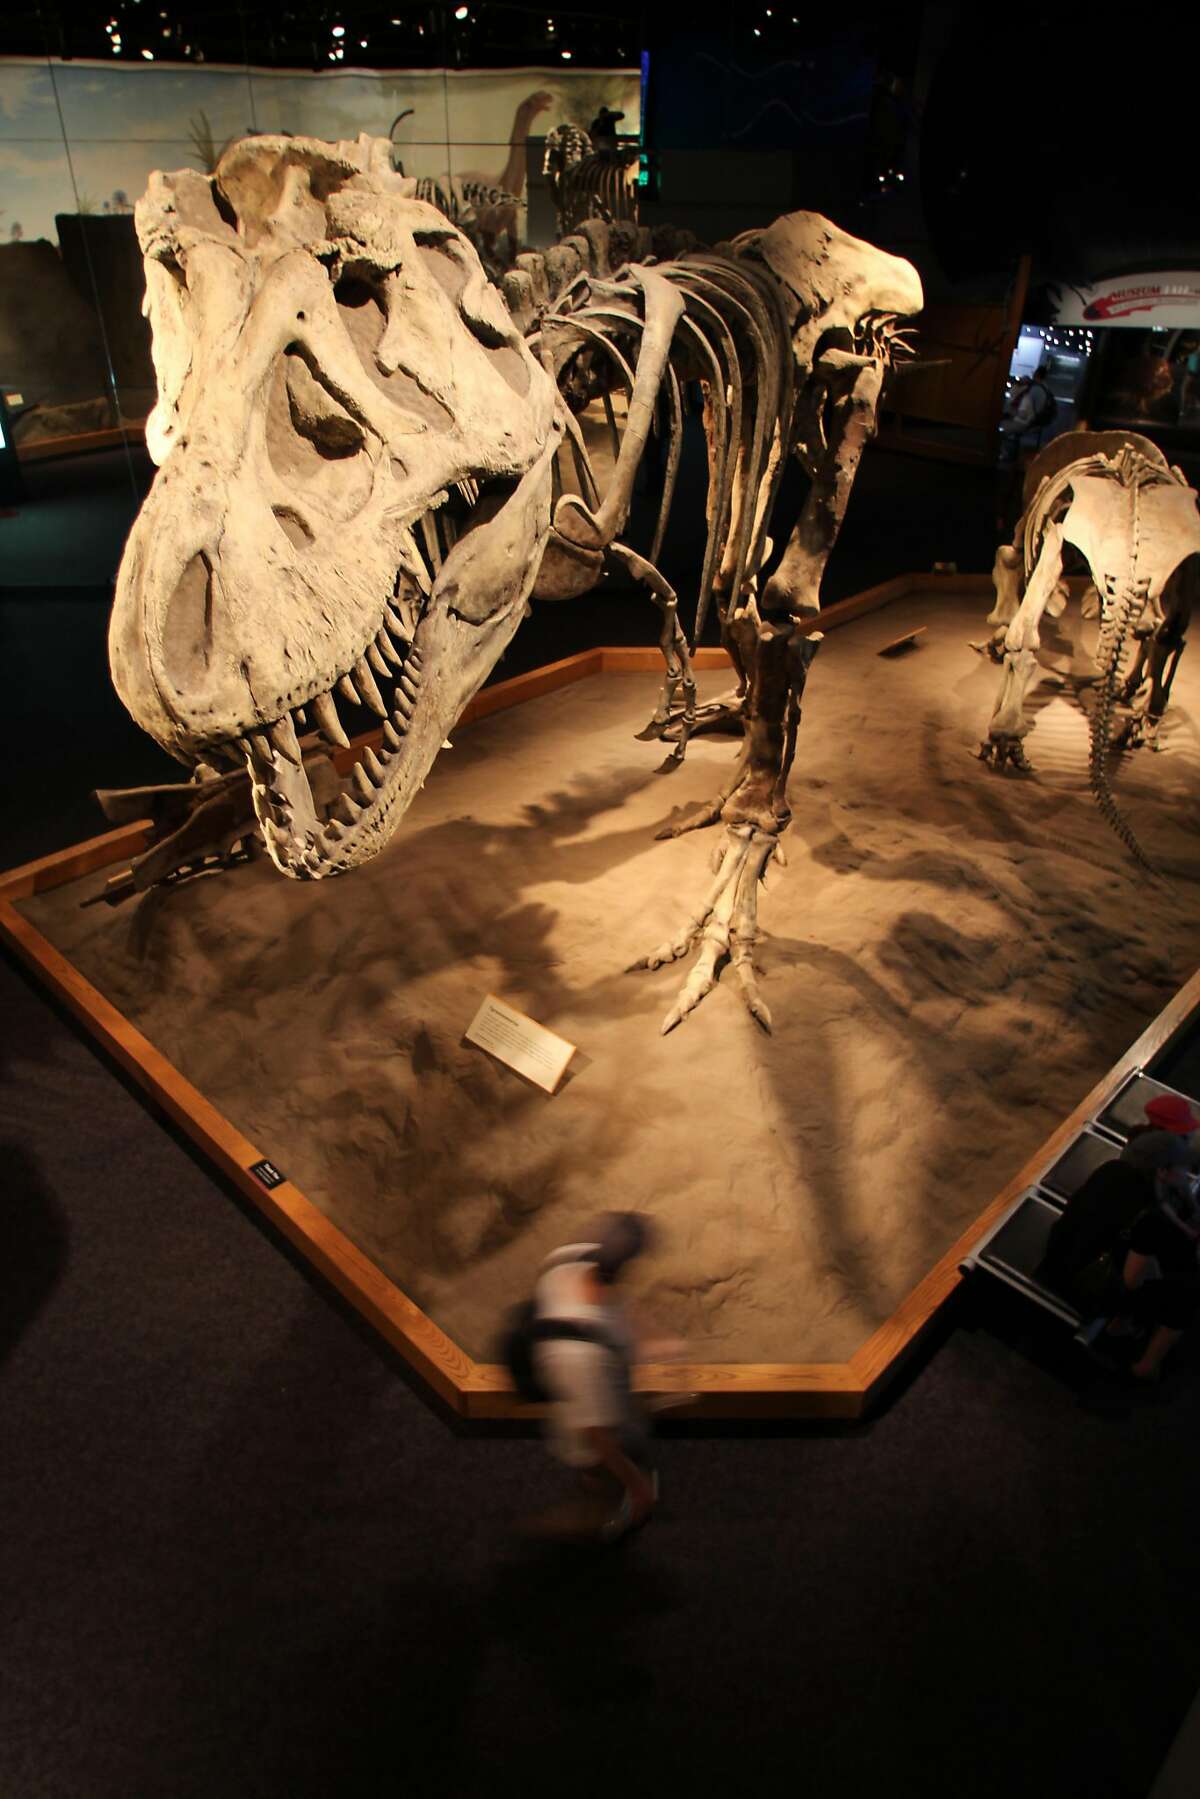 The Royal Tyrrell Museum in Drumheller, Alberta, holds one of the largest collections of�dinosaur�bones and research, in large part because so many fossils have been discovered in the region.